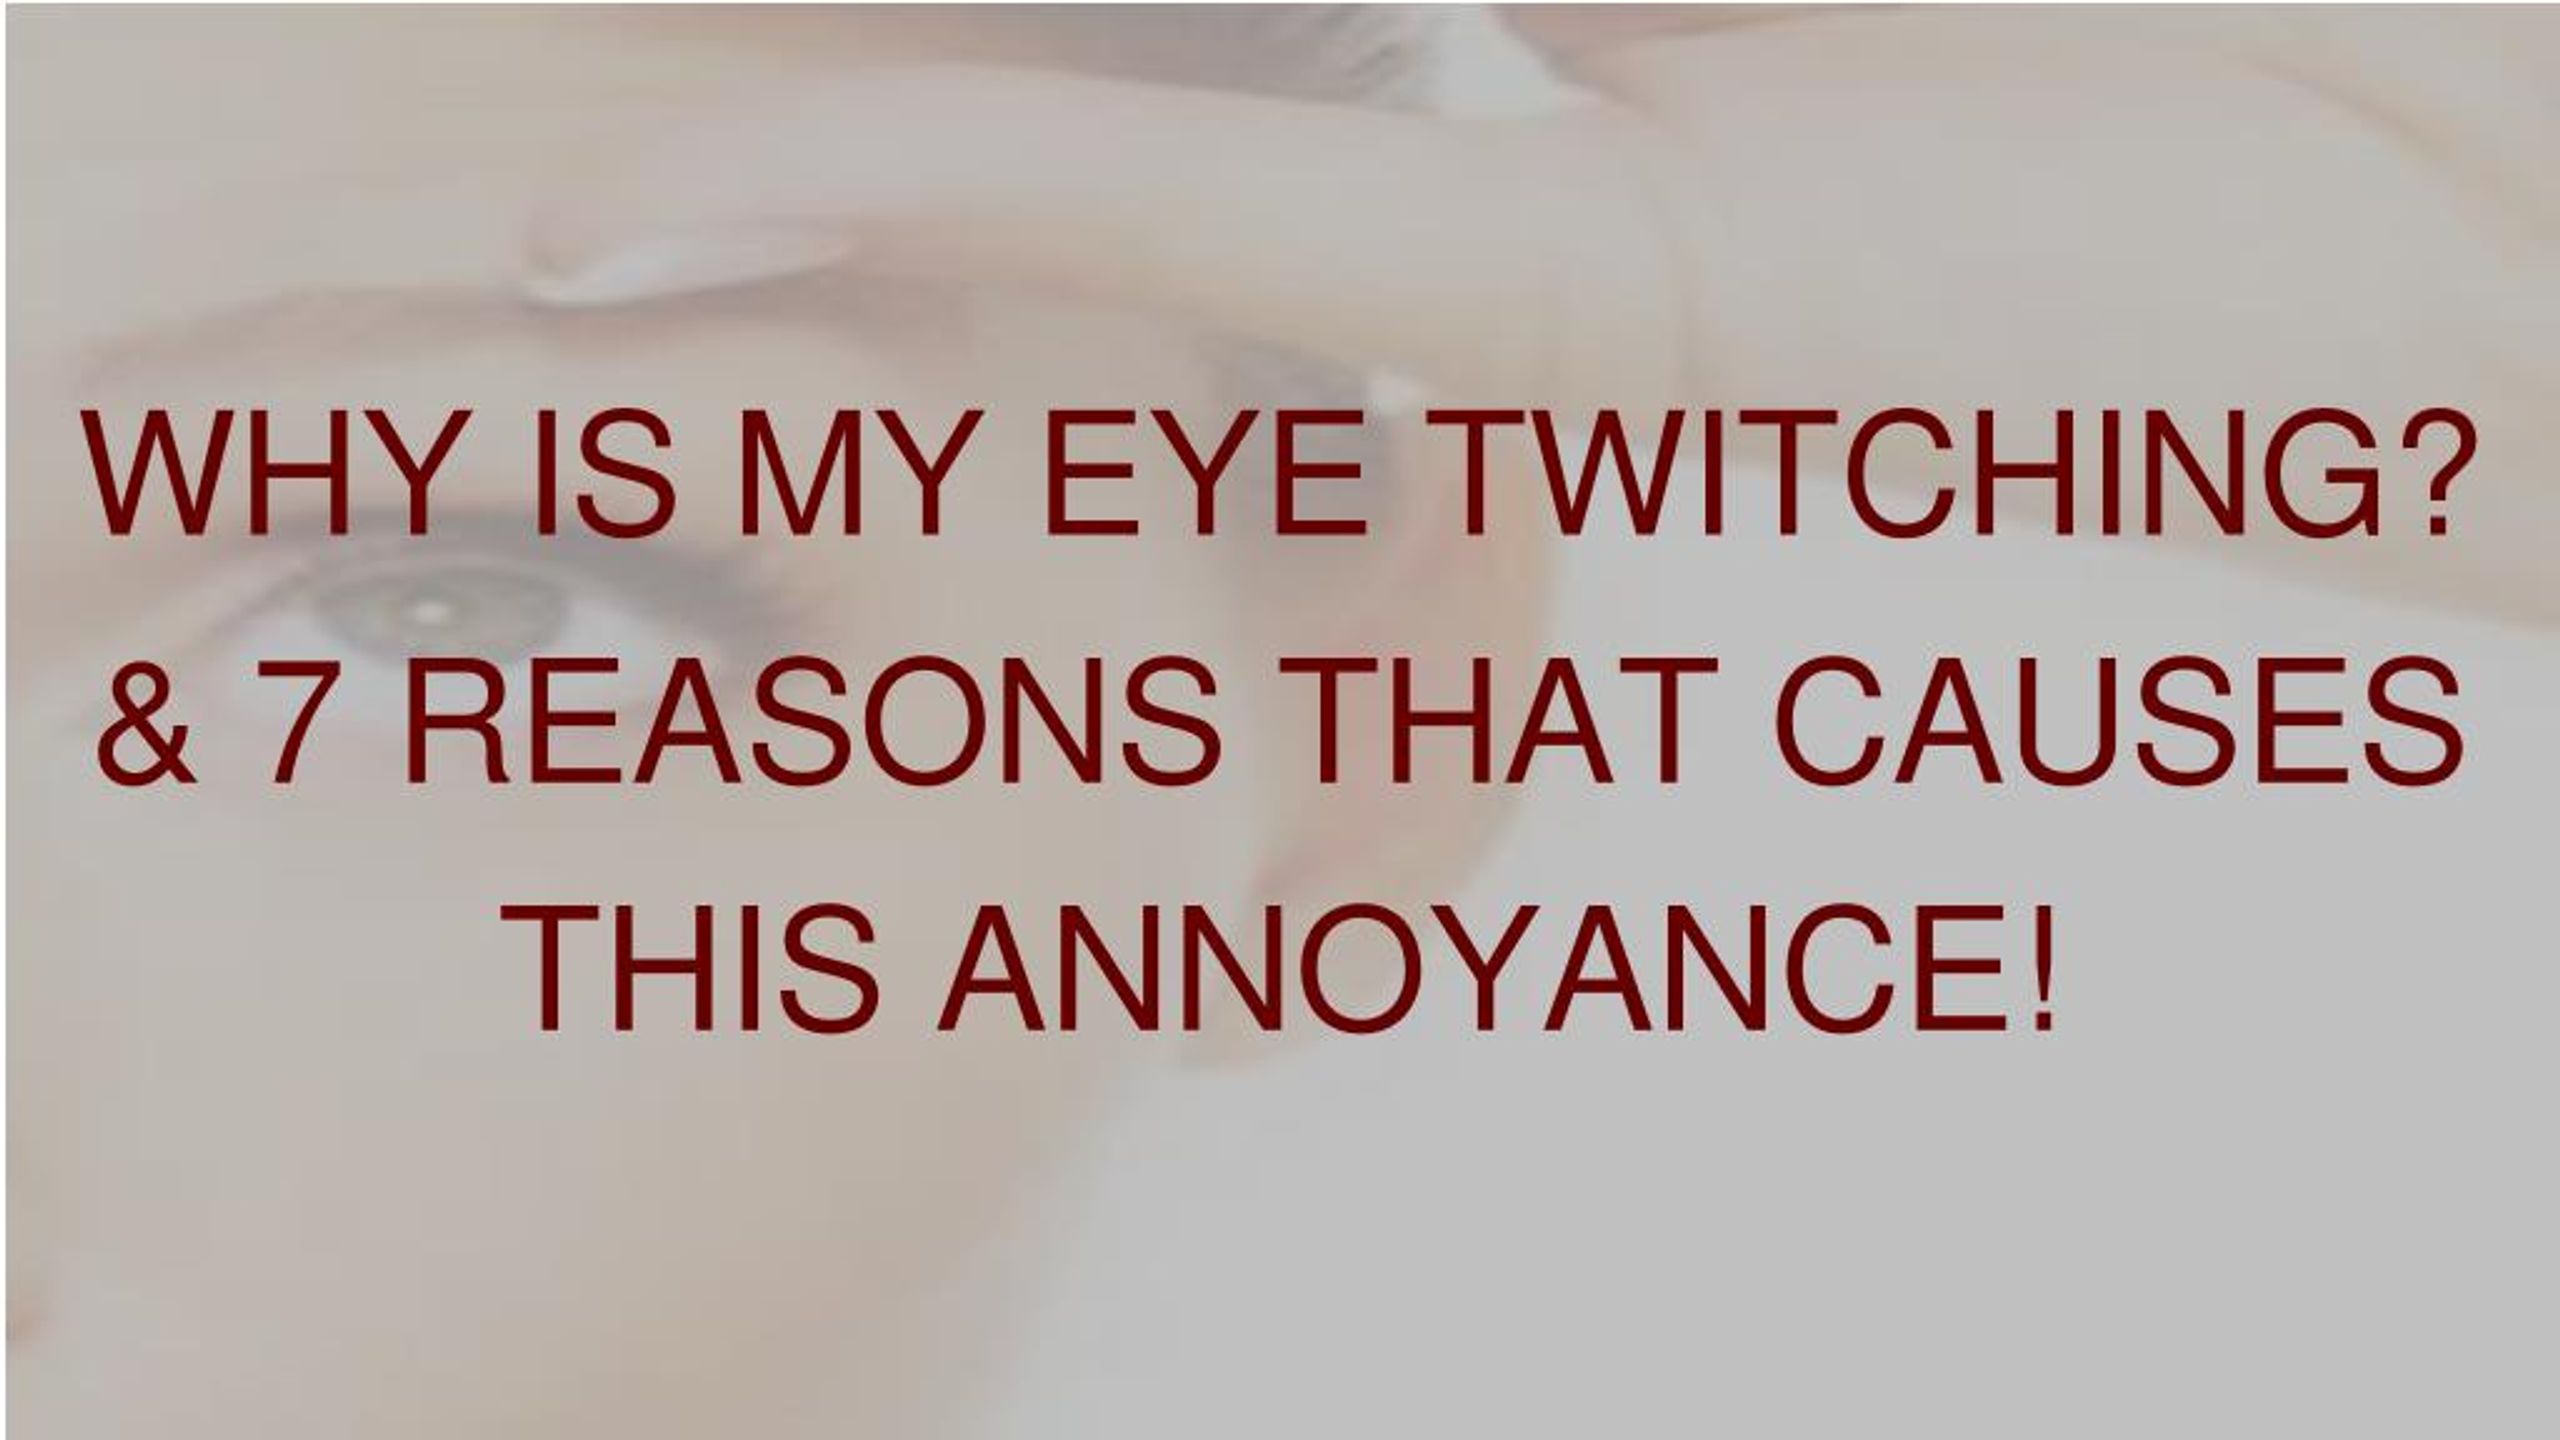 PPT - Why Is My Eye Twitching? 7 Reasons That Causes This Annoyance ...